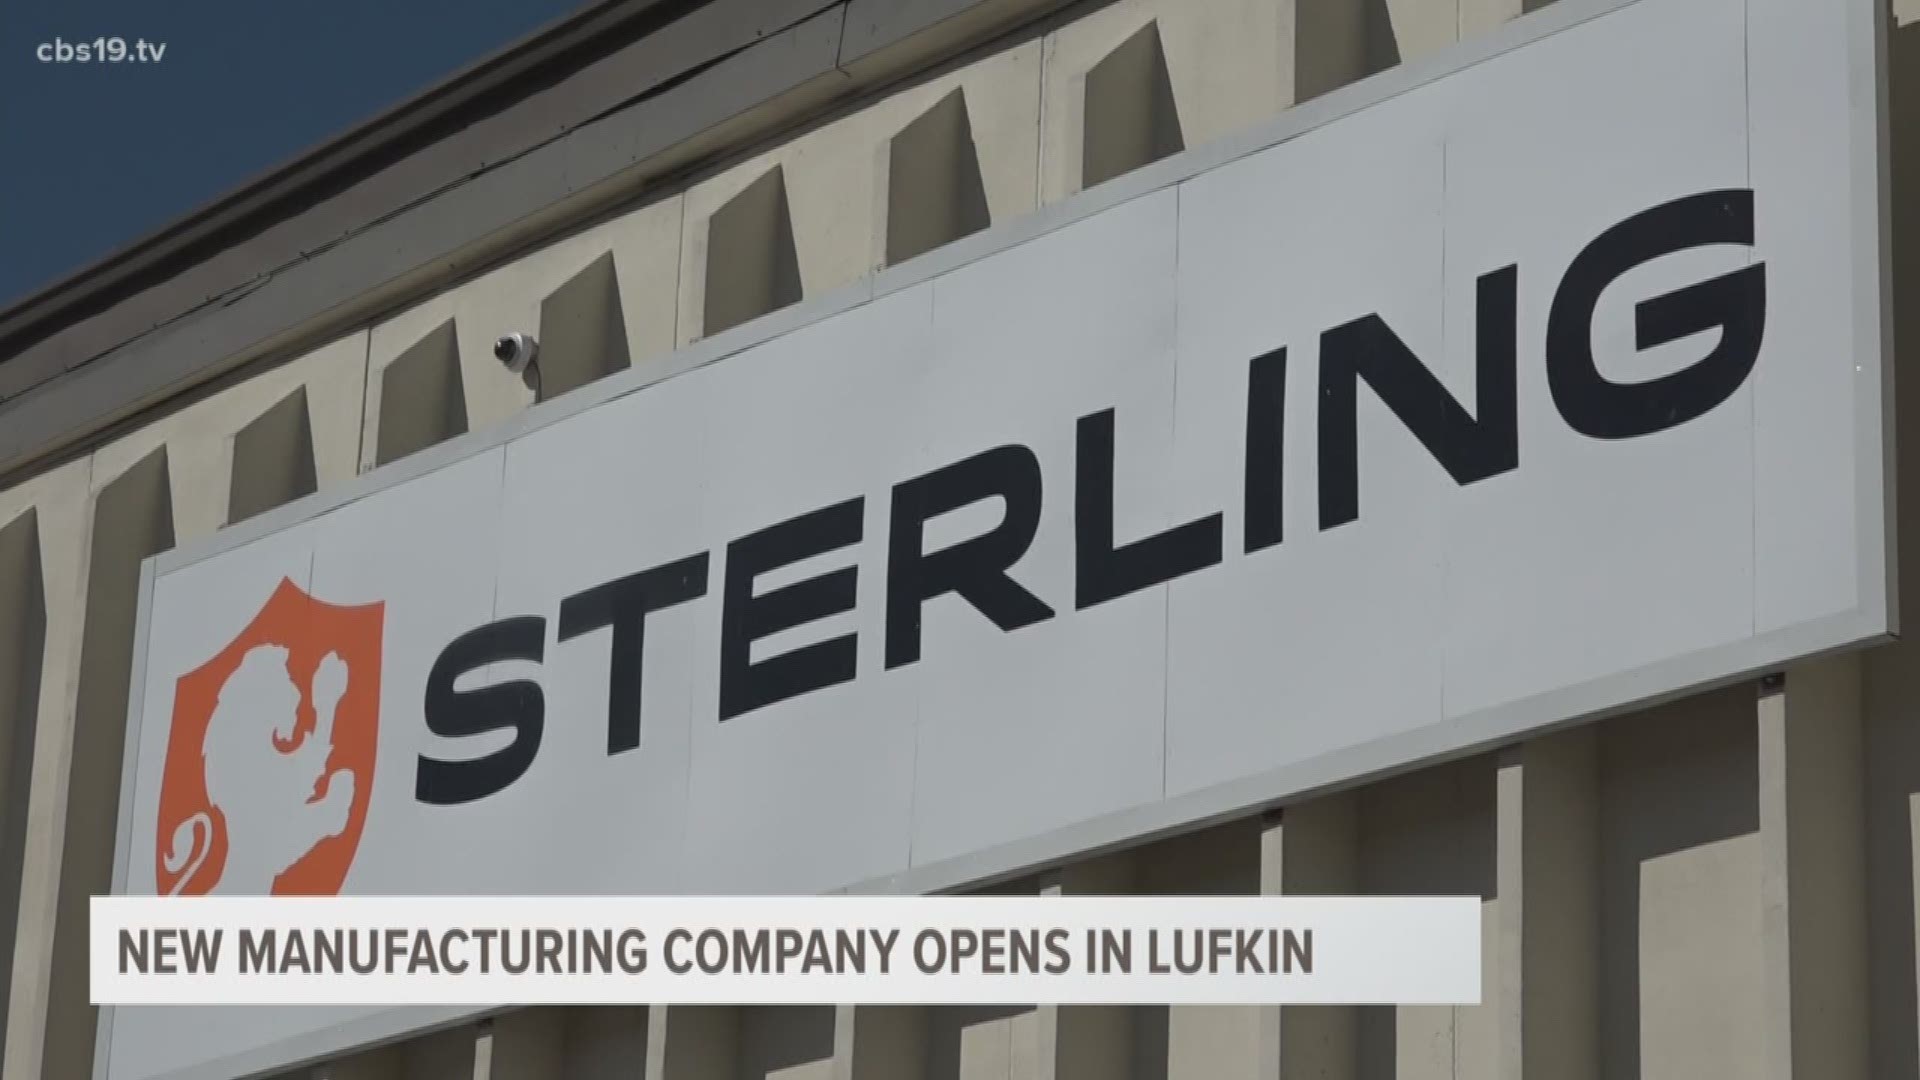 New Manufacturing Company Opens in Lufkin